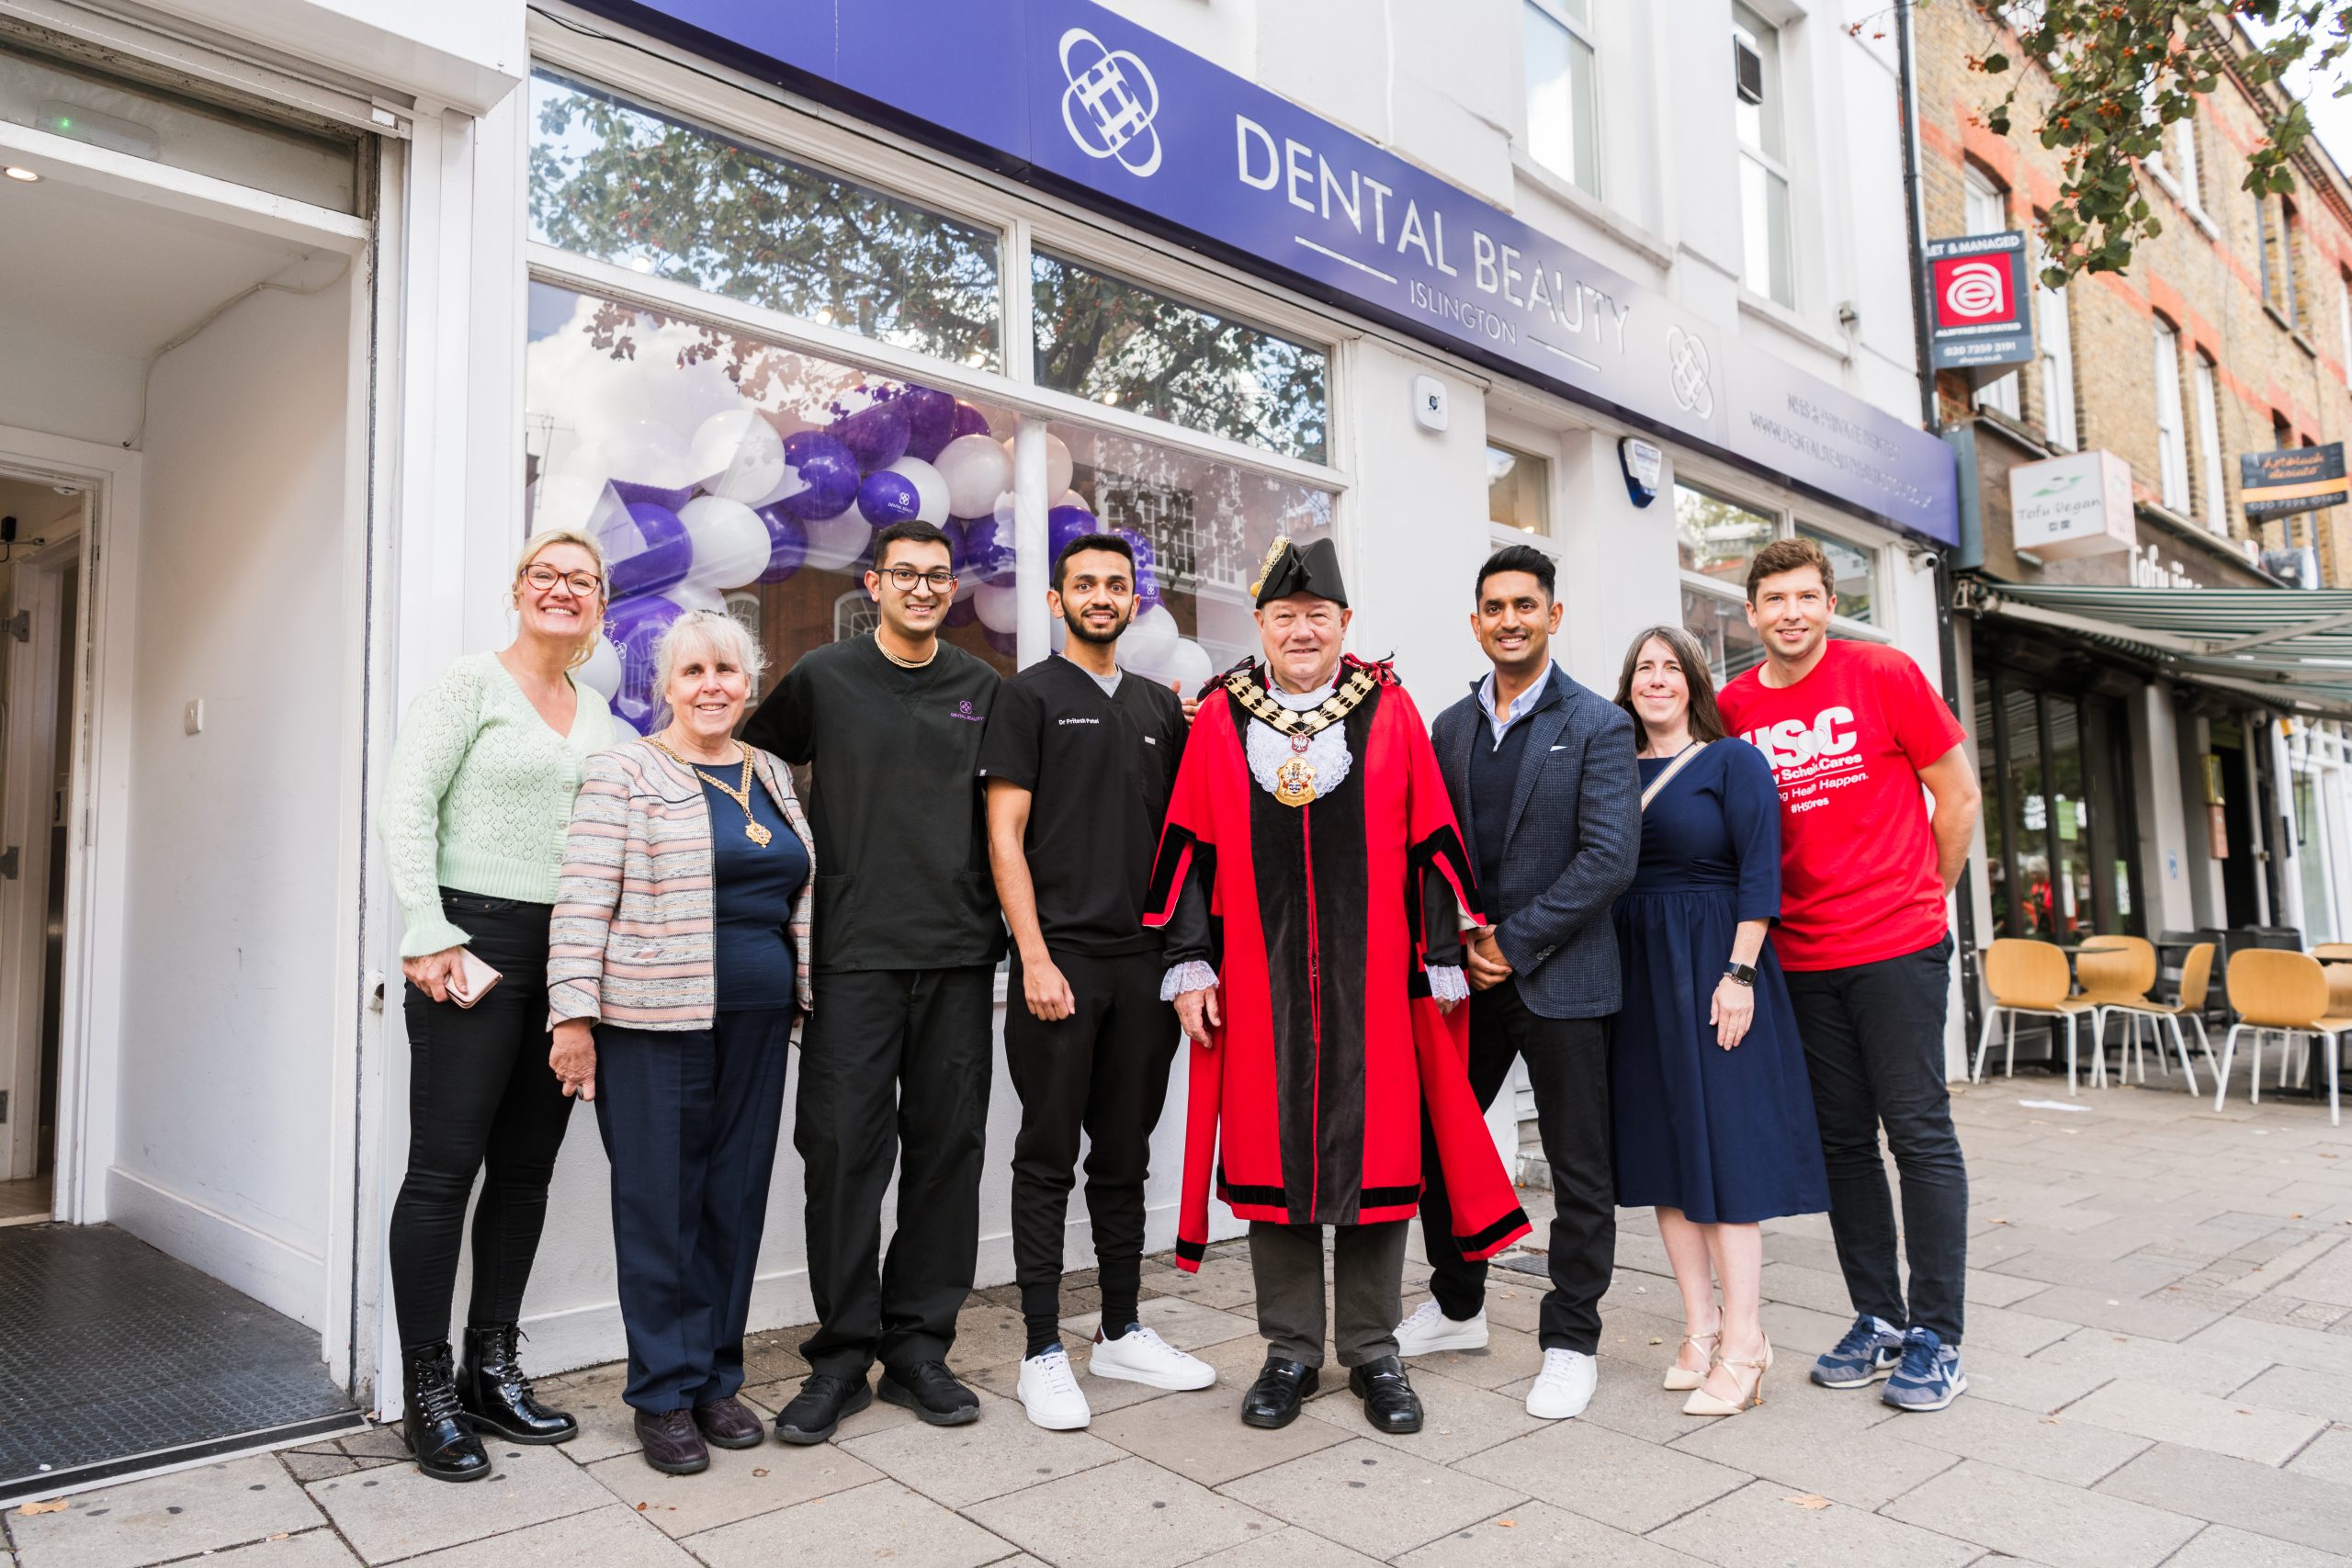 Adding a touch of magic: Rowan Thomas reports back from the Magical Dental Check-Up Day at Islington’s Dental Beauty.